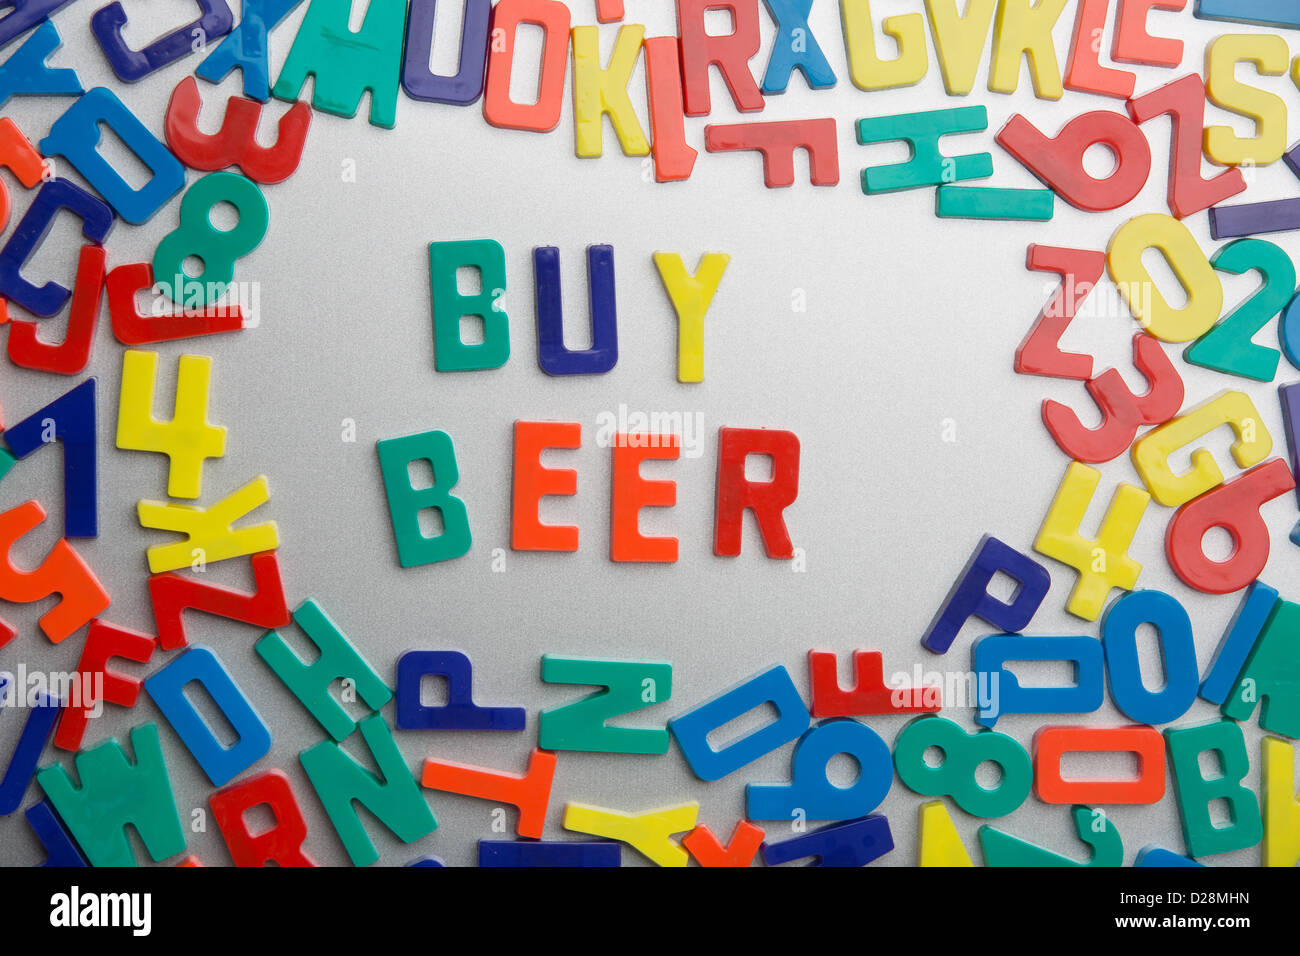 'Buy Beer' - Refrigerator magnet spells a message out of a jumble of letters Stock Photo